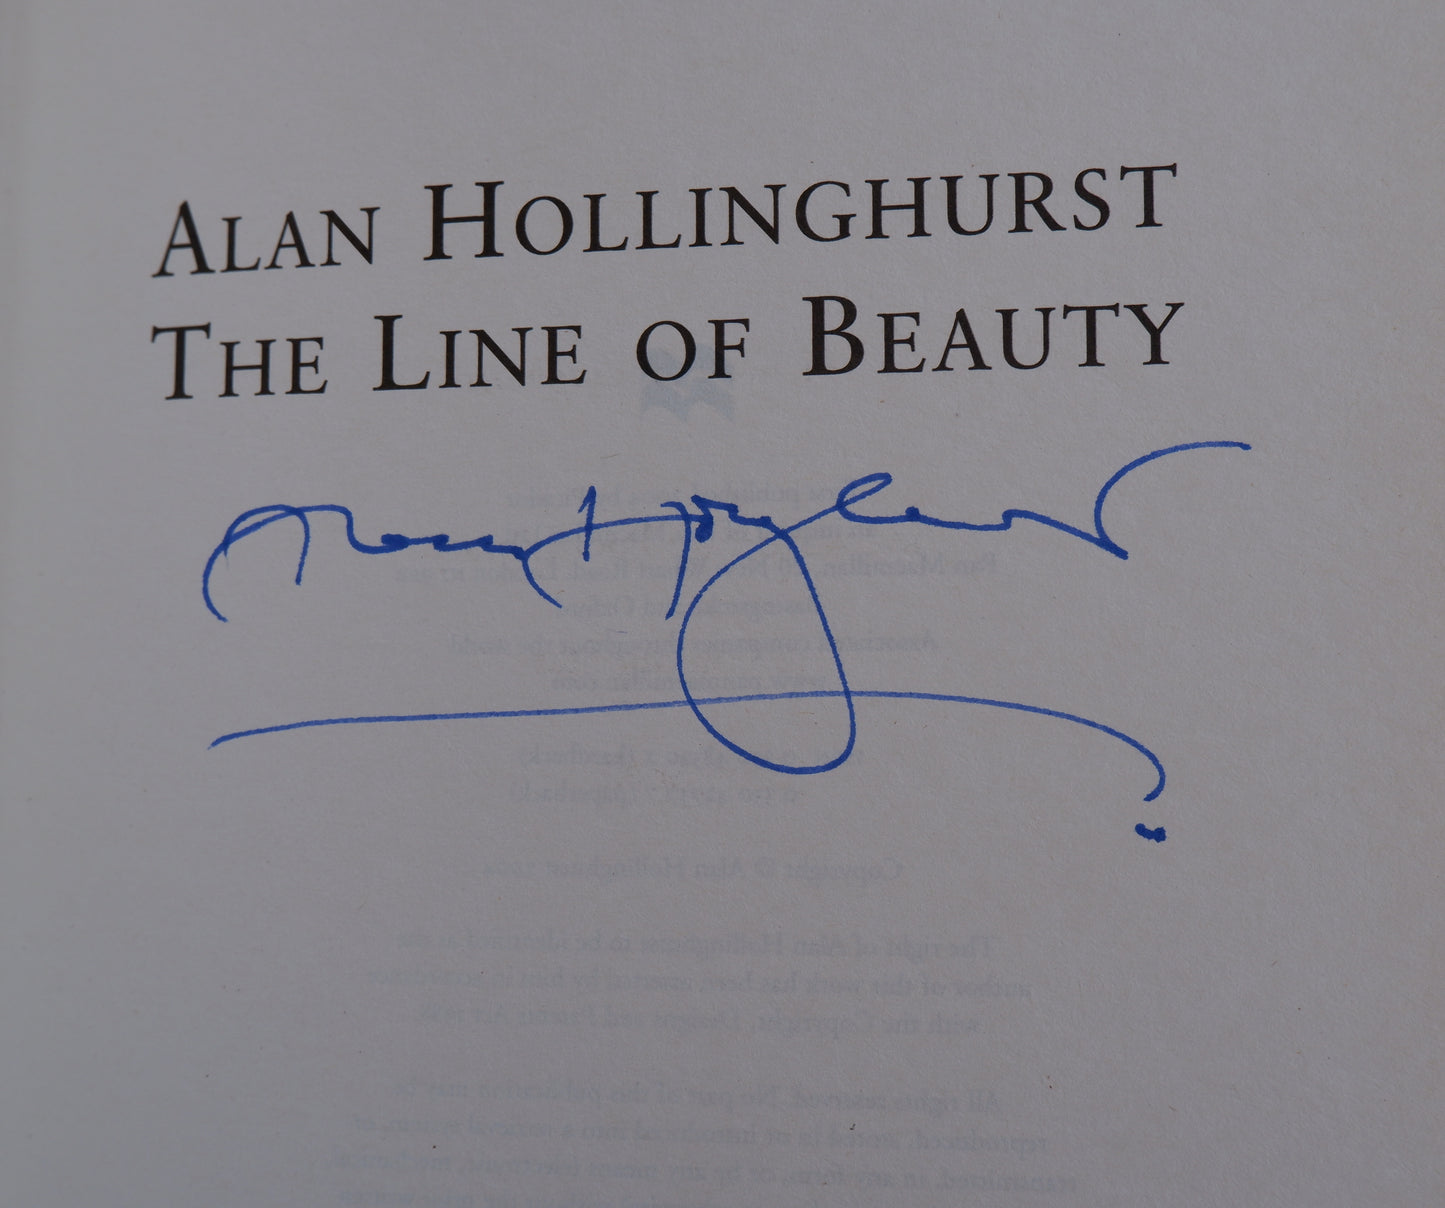 The Line of Beauty - Alan Hollinghurst - Signed, 2004 edition UK Printing - Hardback - Excellent condition